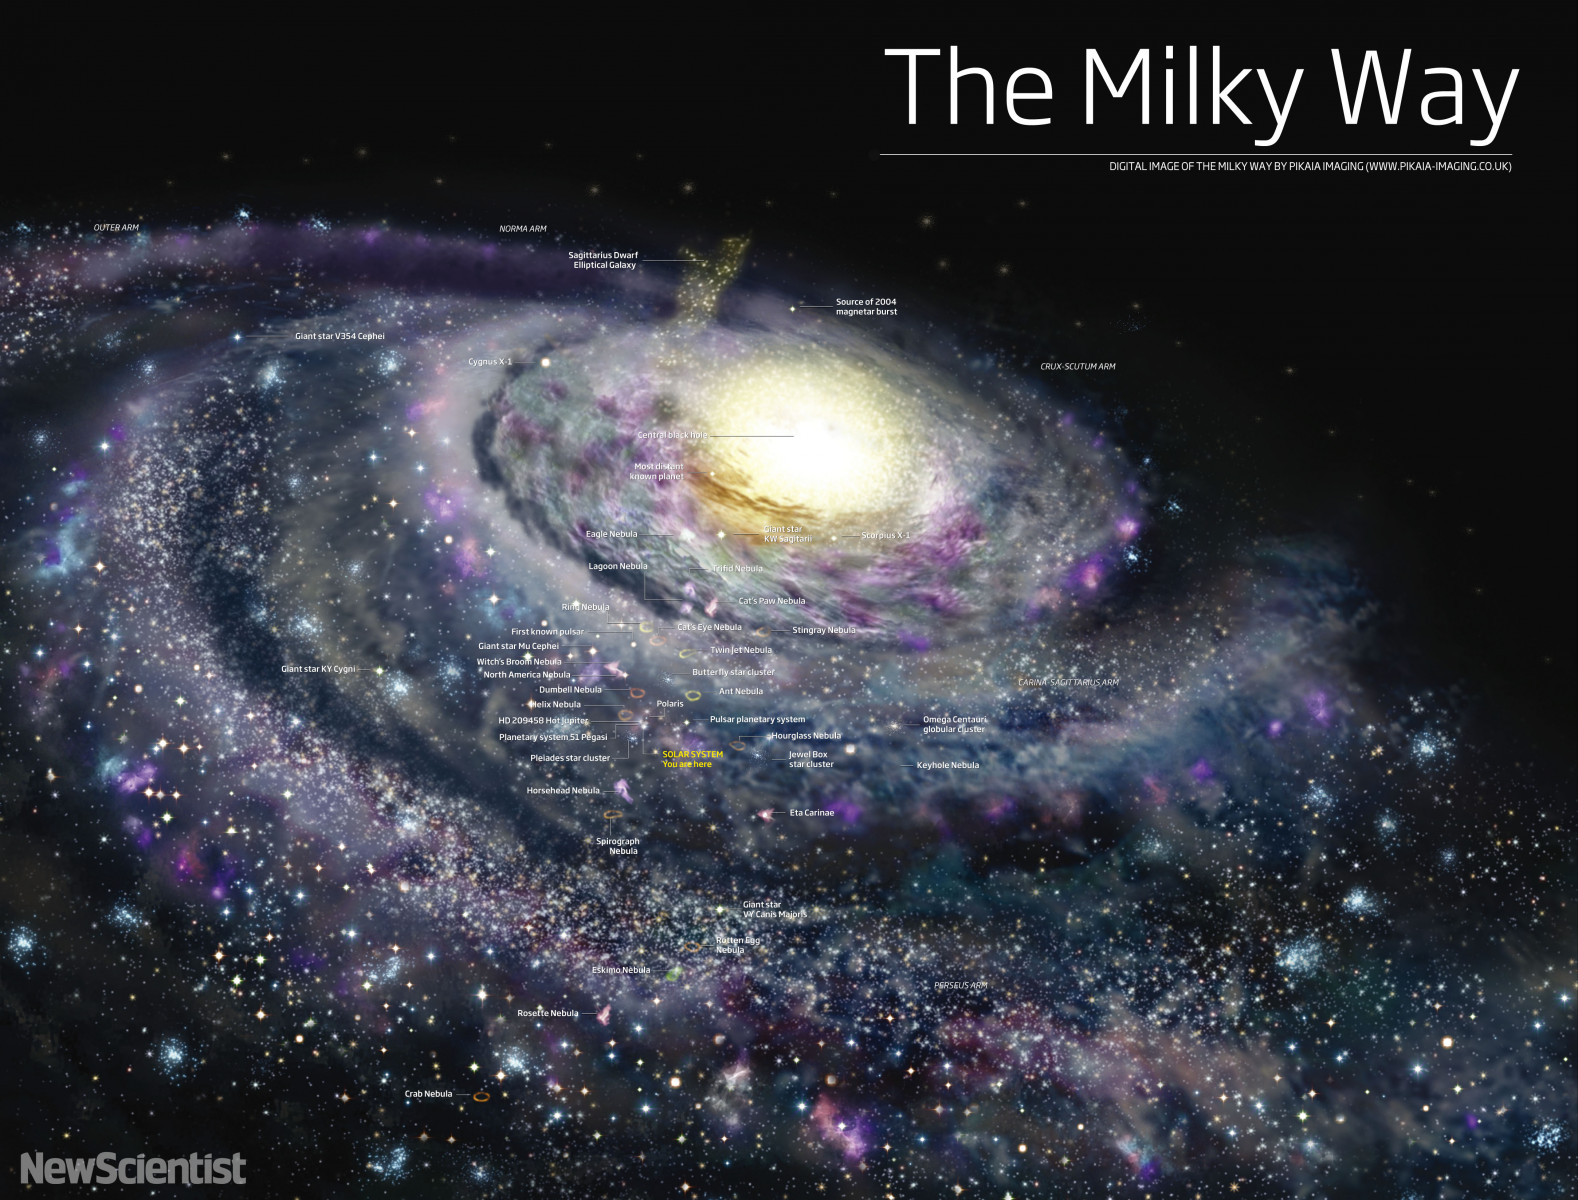 The Milky Way - The Big Picture